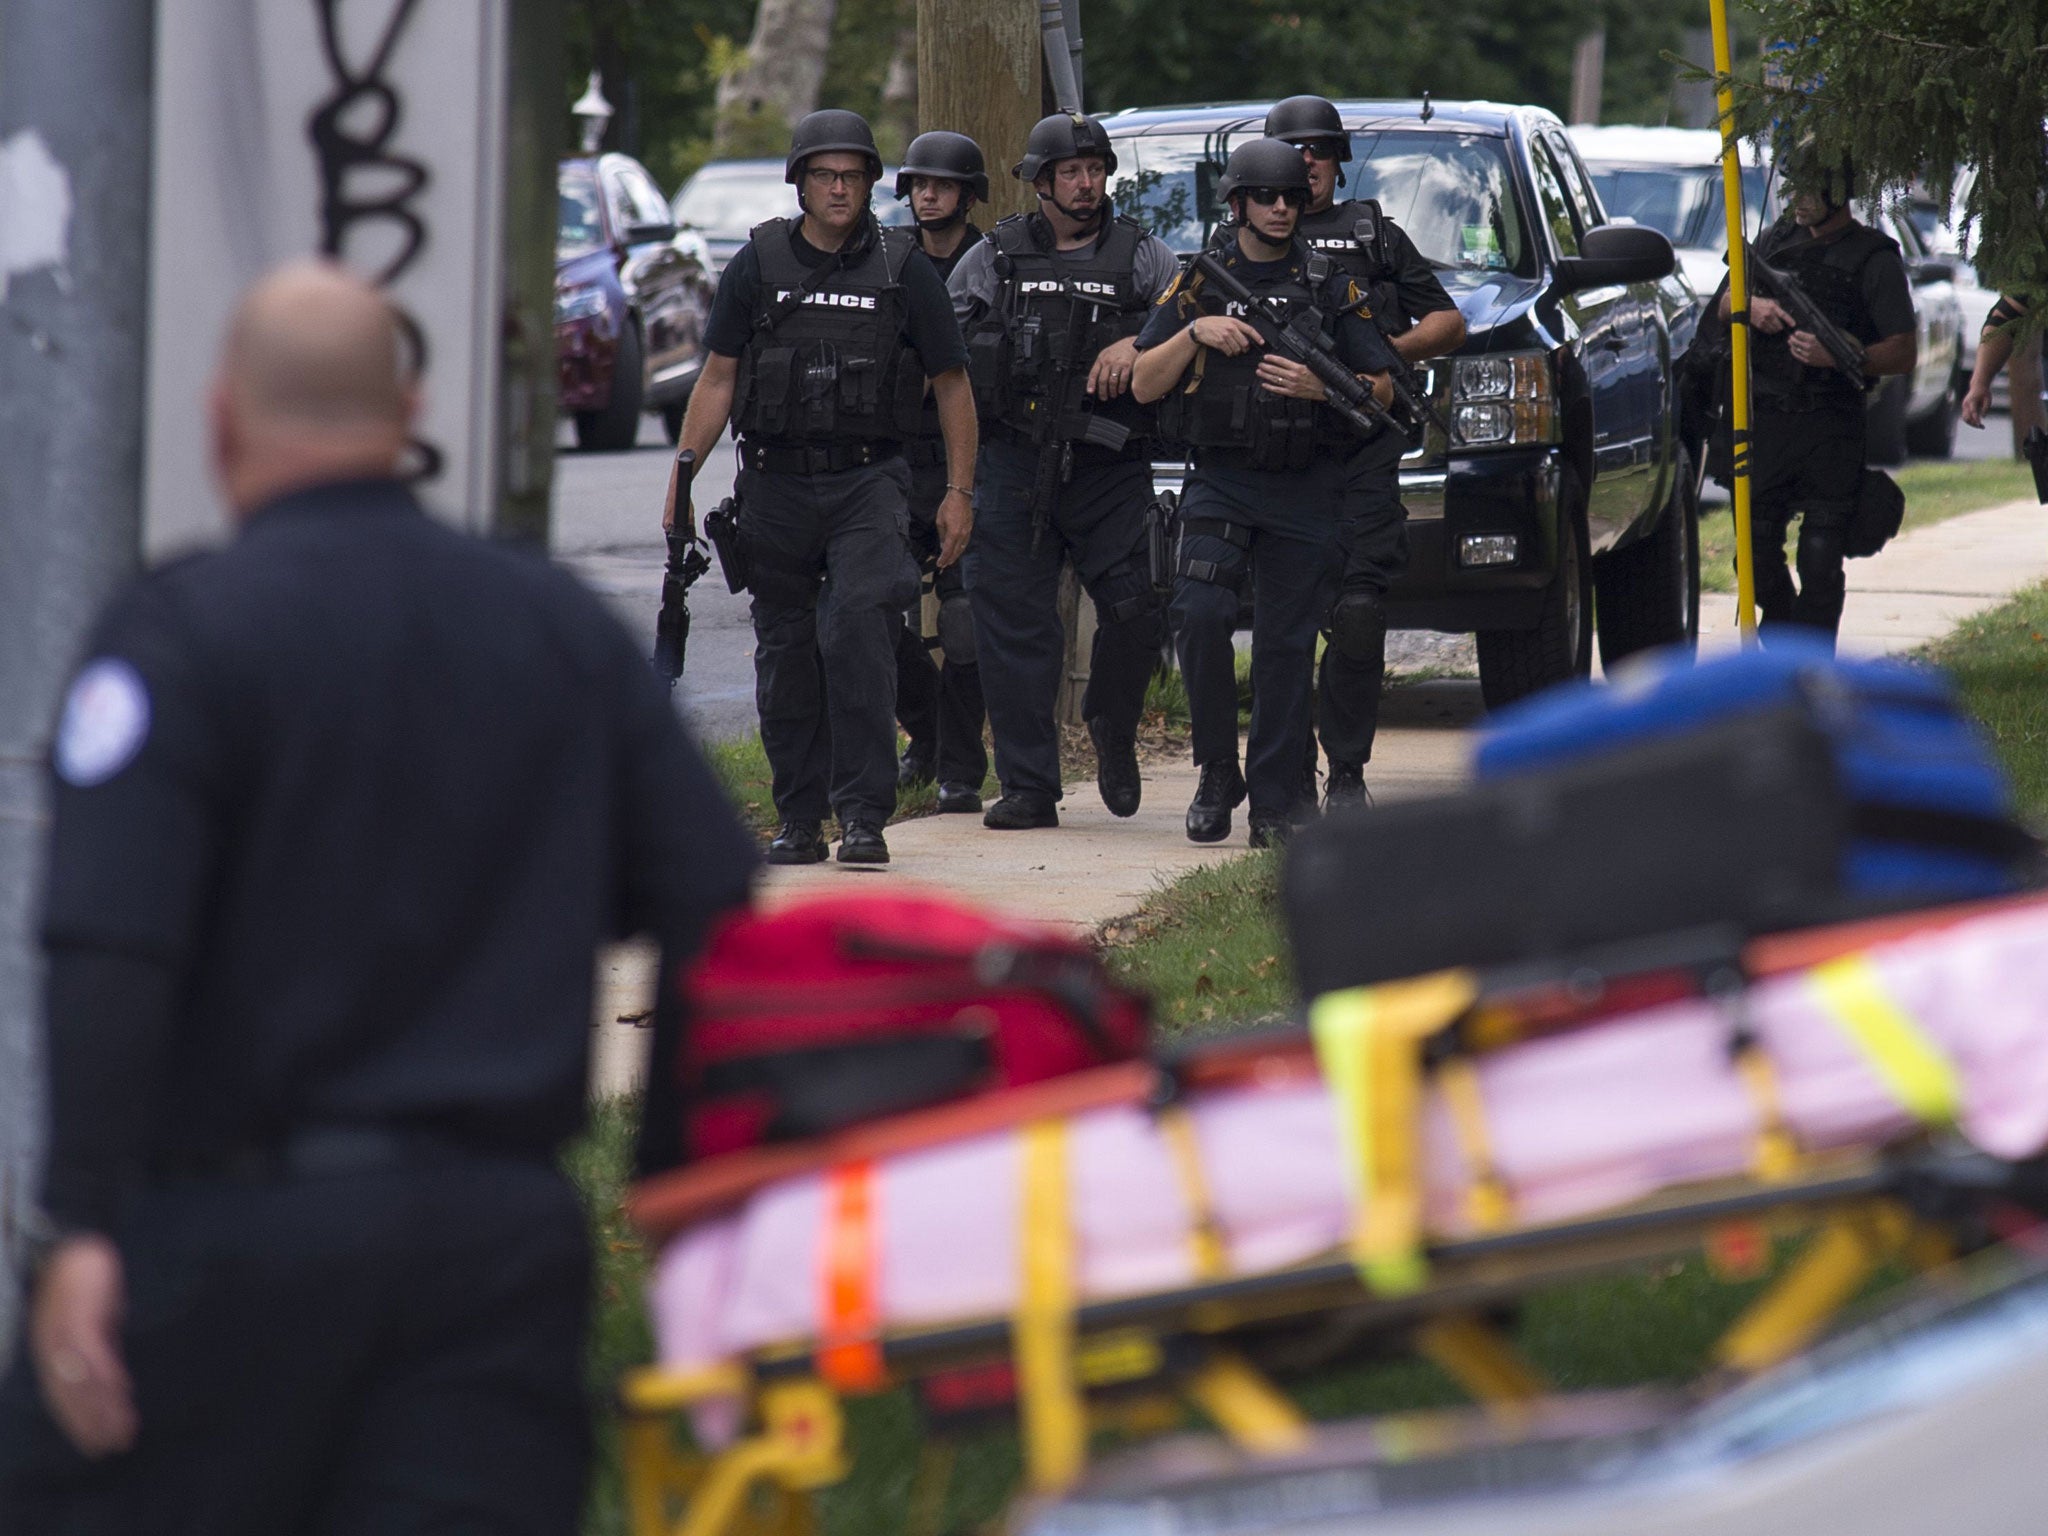 Police gather at the scene of a shooting at the Mercy-Fitzgerald Hospital in Darby, Pennsylvania on July 24, 2014. A gunman opened fire inside a Pennsylvania psychiatric facility on Thursday, killing a woman and wounding a doctor before he was shot and cr